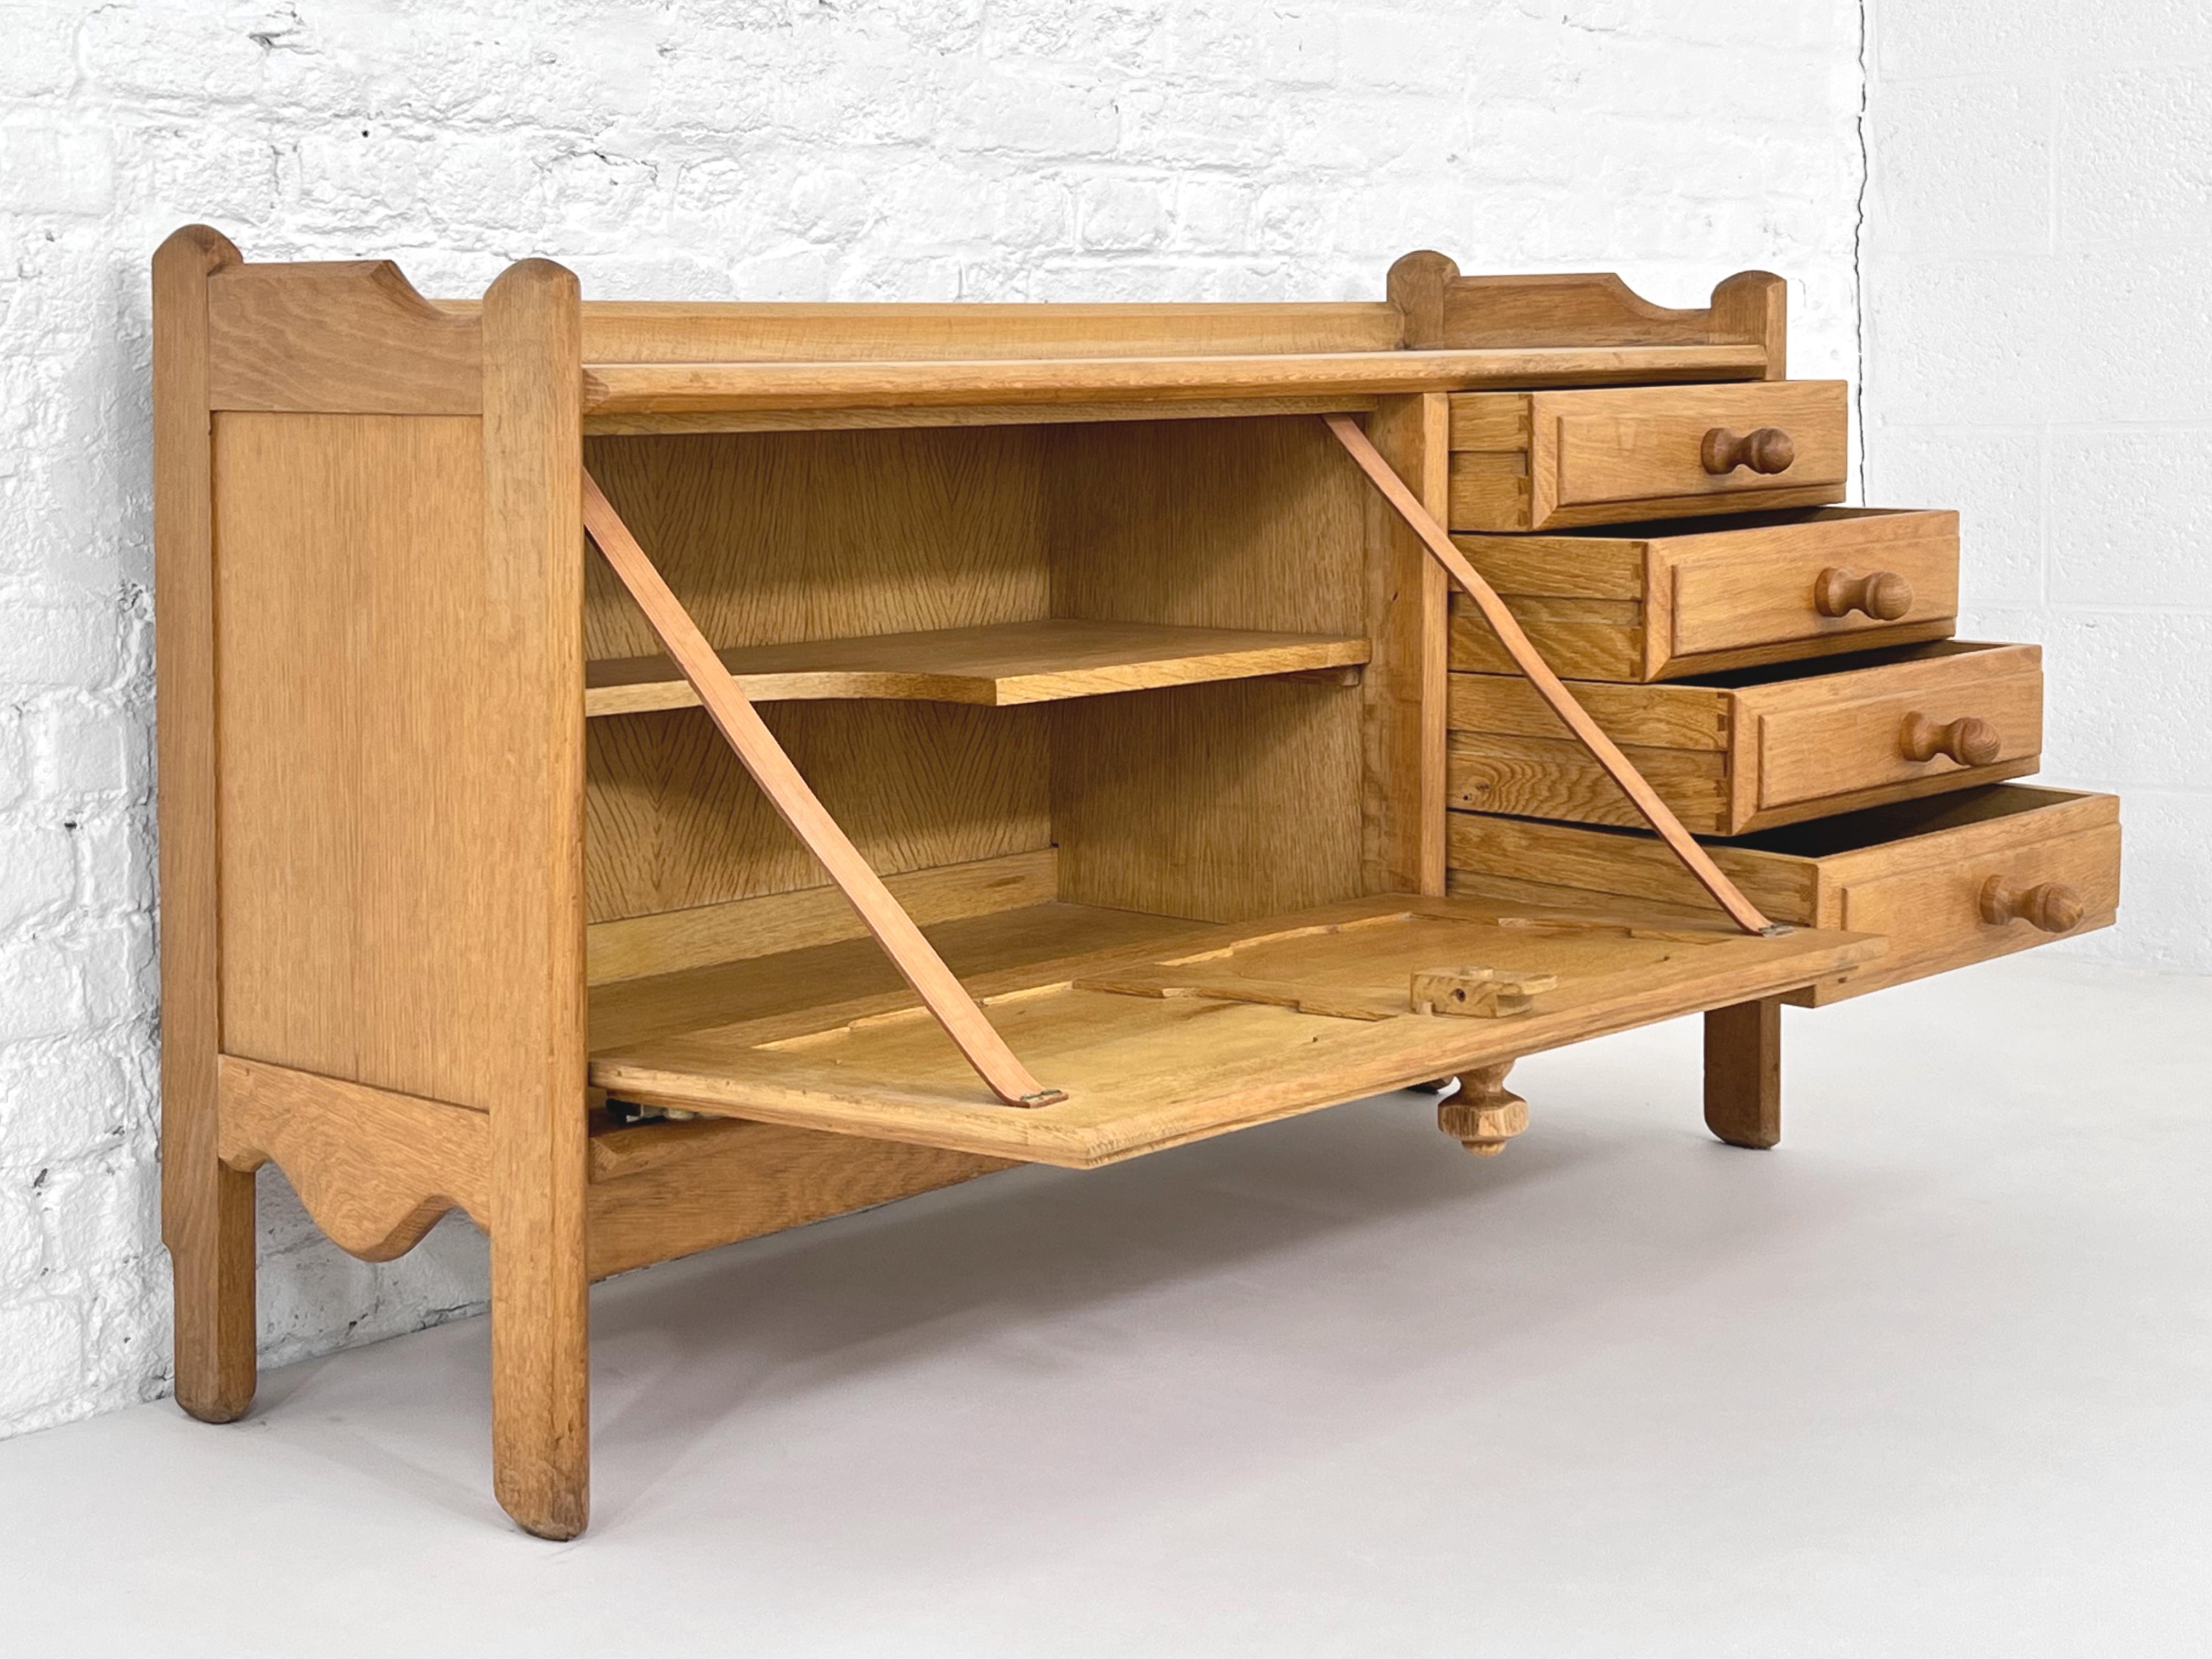 1960s French Guillerme & Chambron Design Oak Wooden Bar Cabinet composed of 4 drawers one side and a bar storage space tilting door opening system with leather straps and brass finishes. Fine craftmanship, graphic panel door.